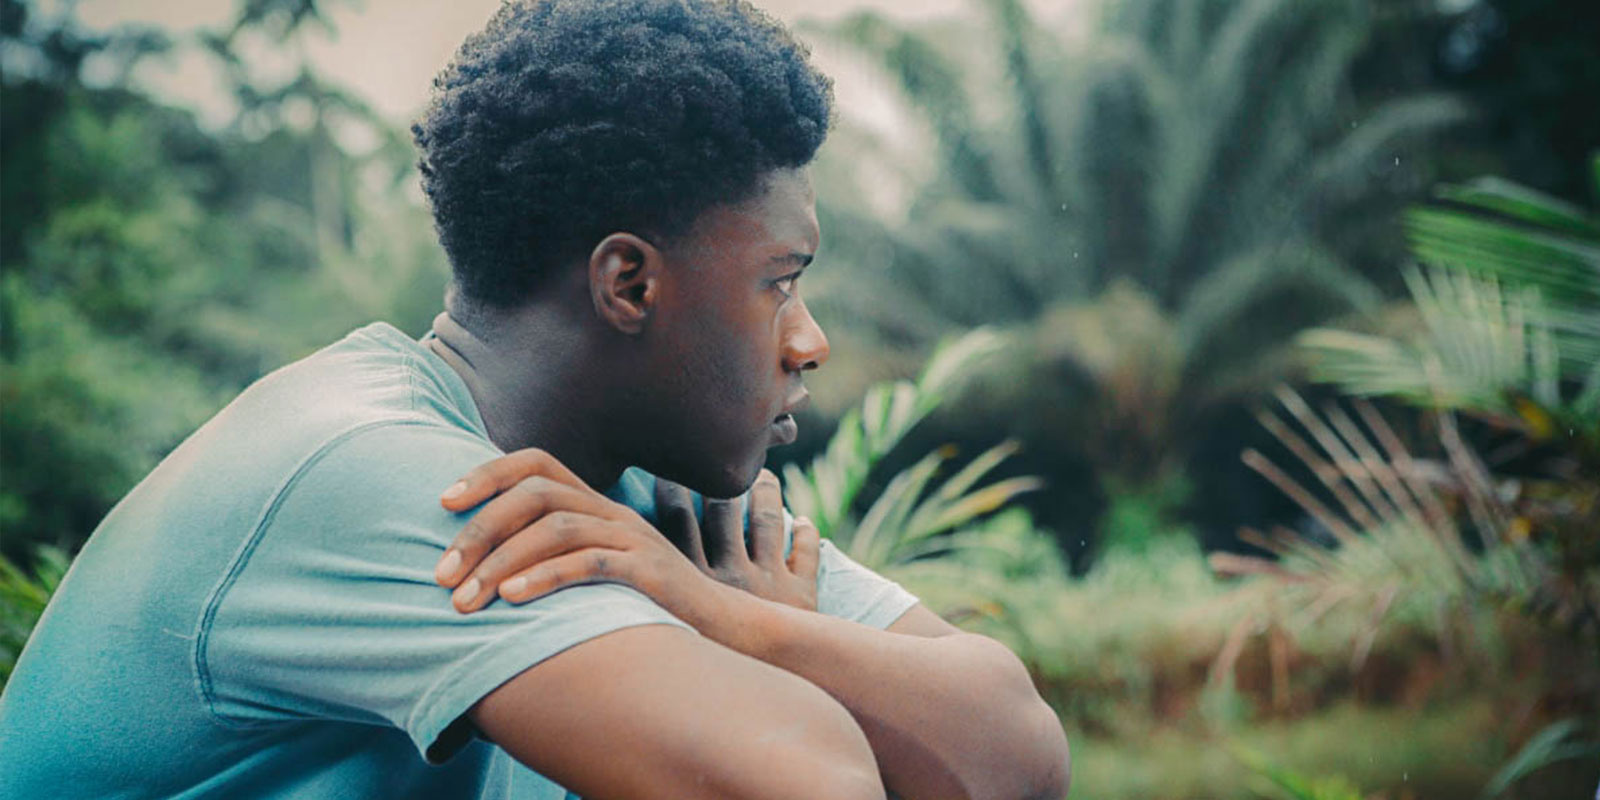 Screenshot from 'The Last Tree' directed by Shola Amoo, featuring a young actor surrounding by greenery looking off to the distance